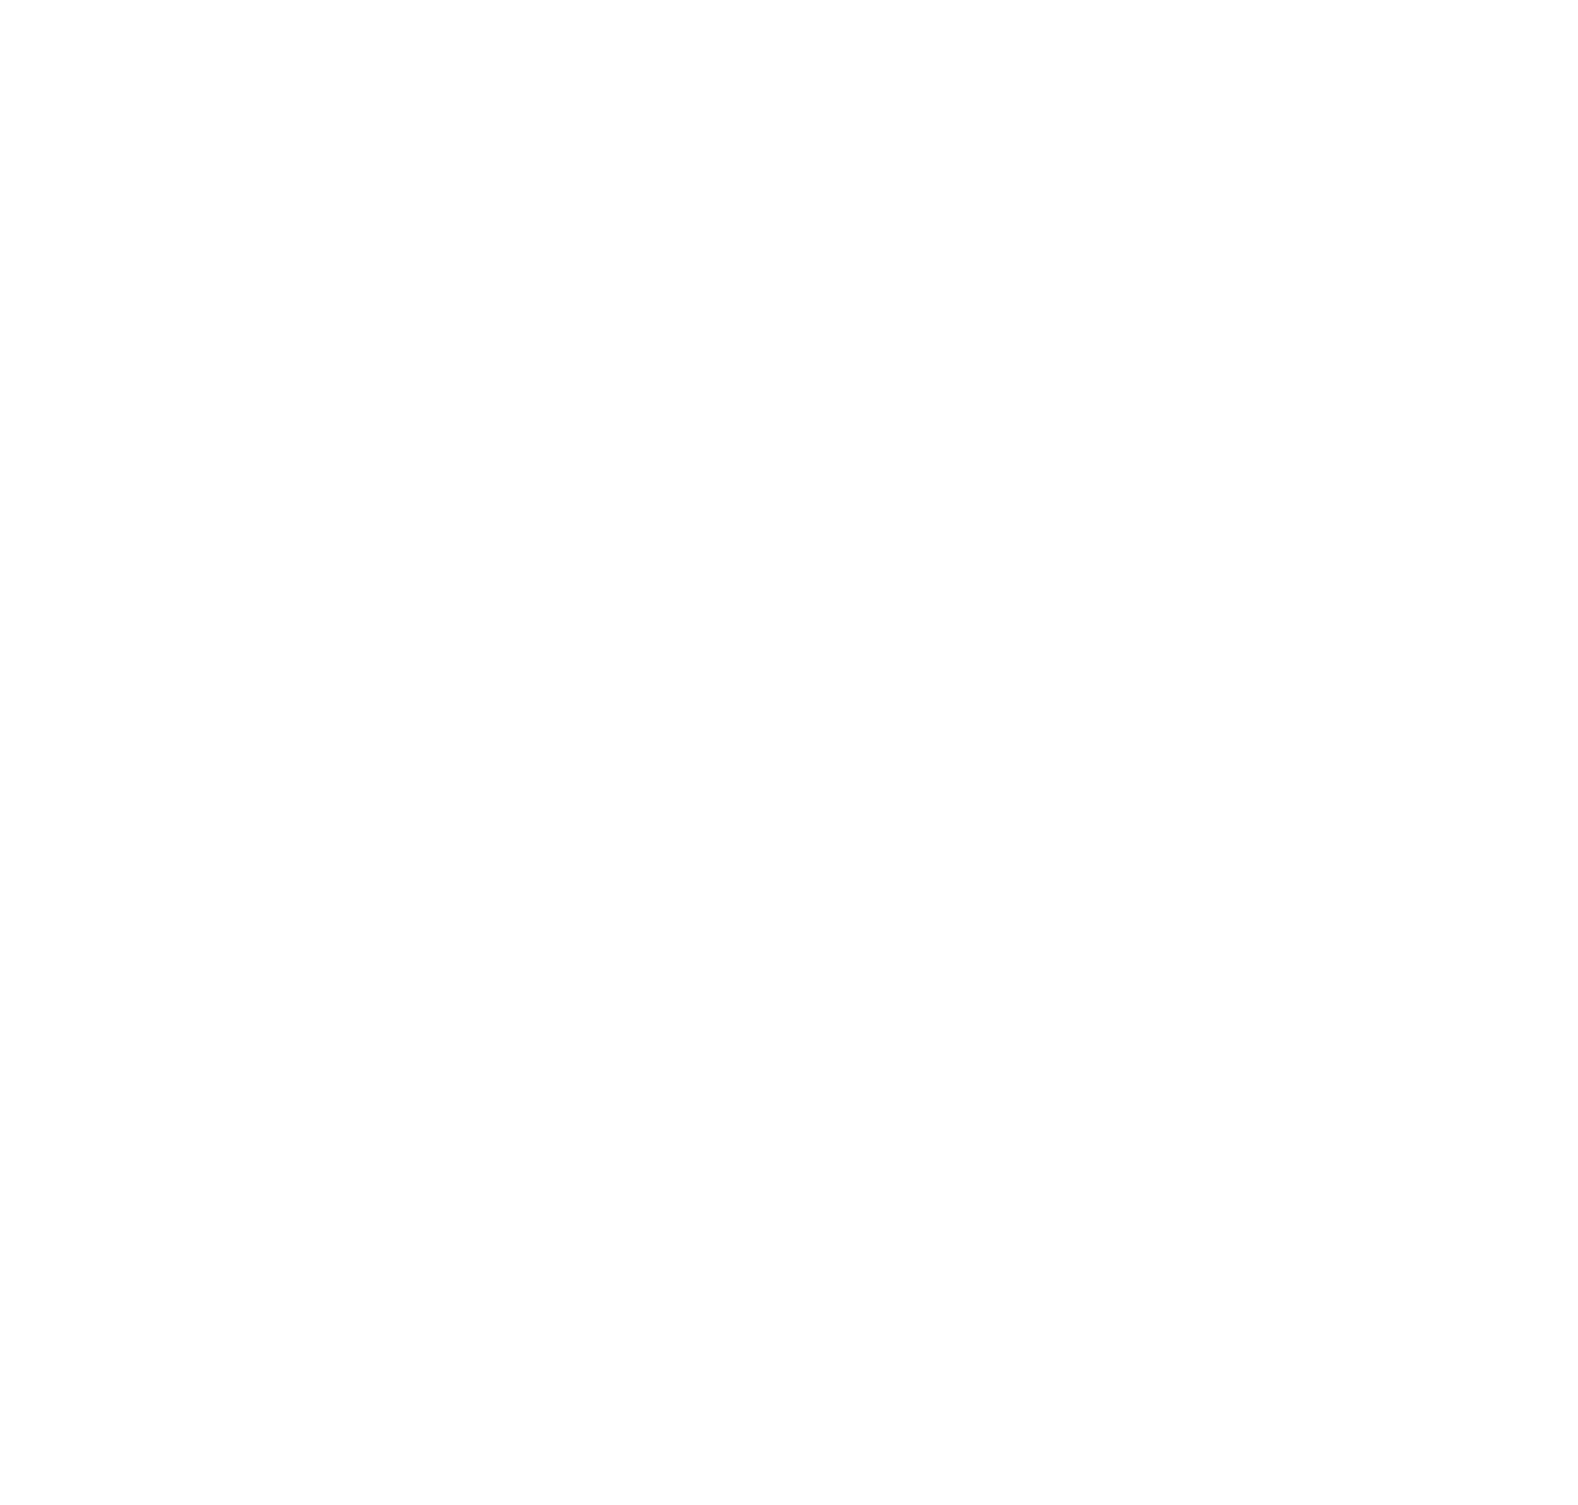 Knightscope logo for dark backgrounds (transparent PNG)